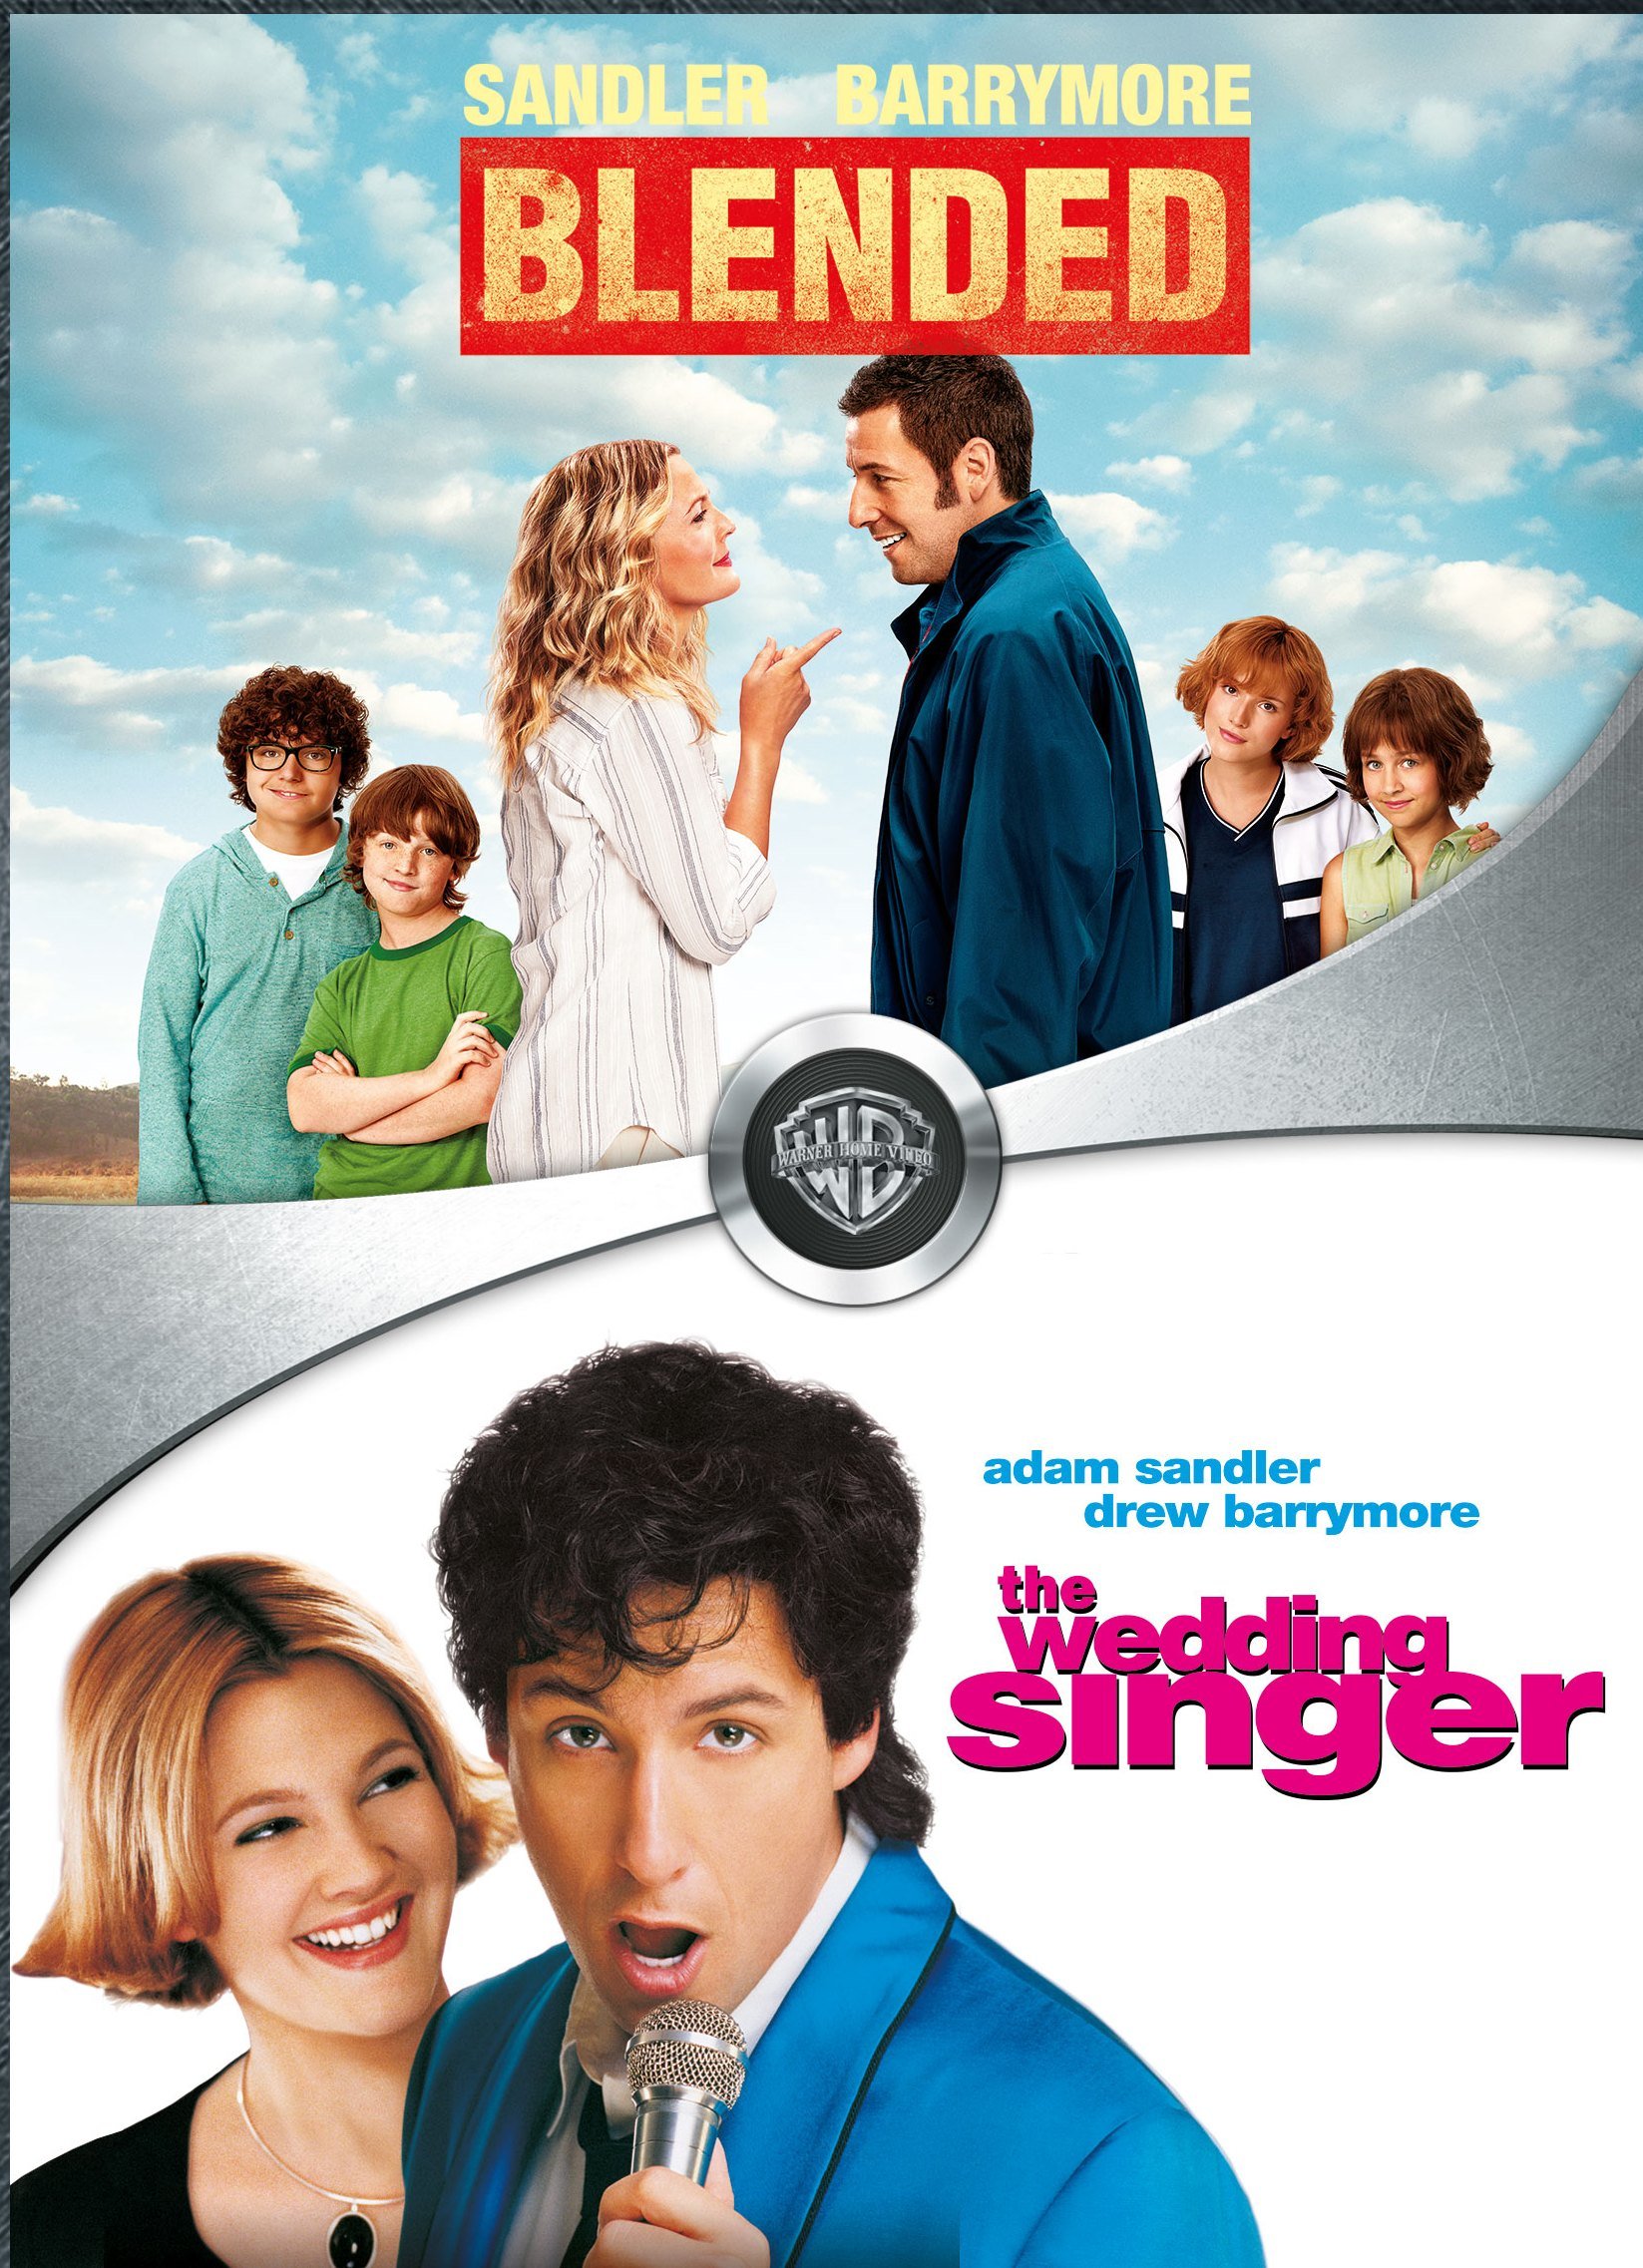 blended-the-wedding-singer-movie-purchase-or-watch-online